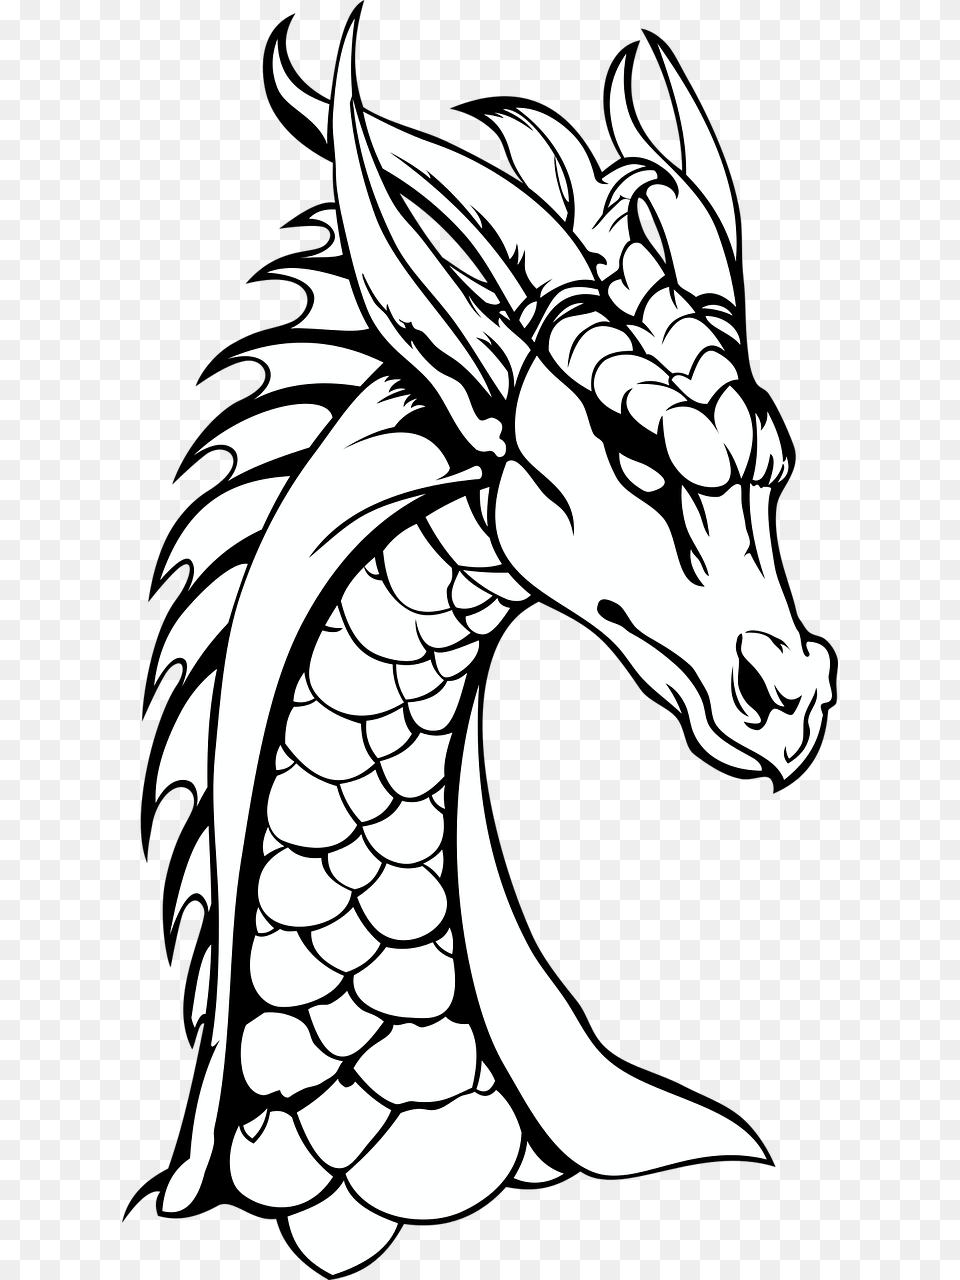 Dragon Neck The Head Of The Picture Dragons Black And White, Person Png Image